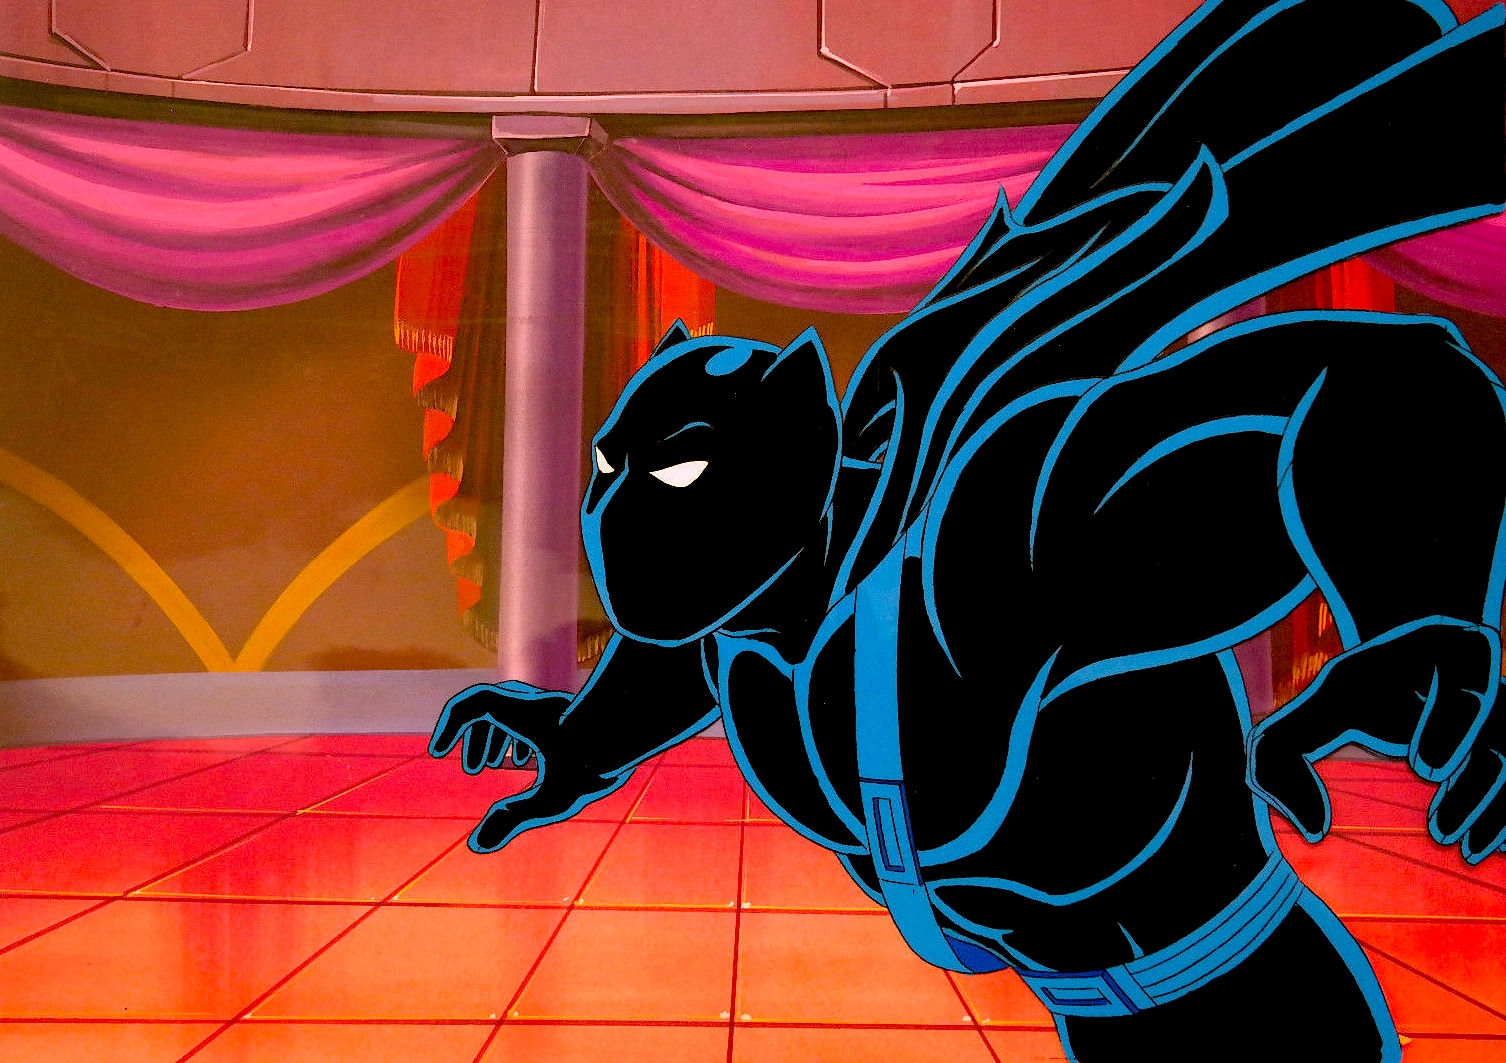 Cel and Original Background of the Black Panther from Fantasic Four Animated  Series, in C E's Marvel Animation Cel Set Ups * Comic Art Gallery Room